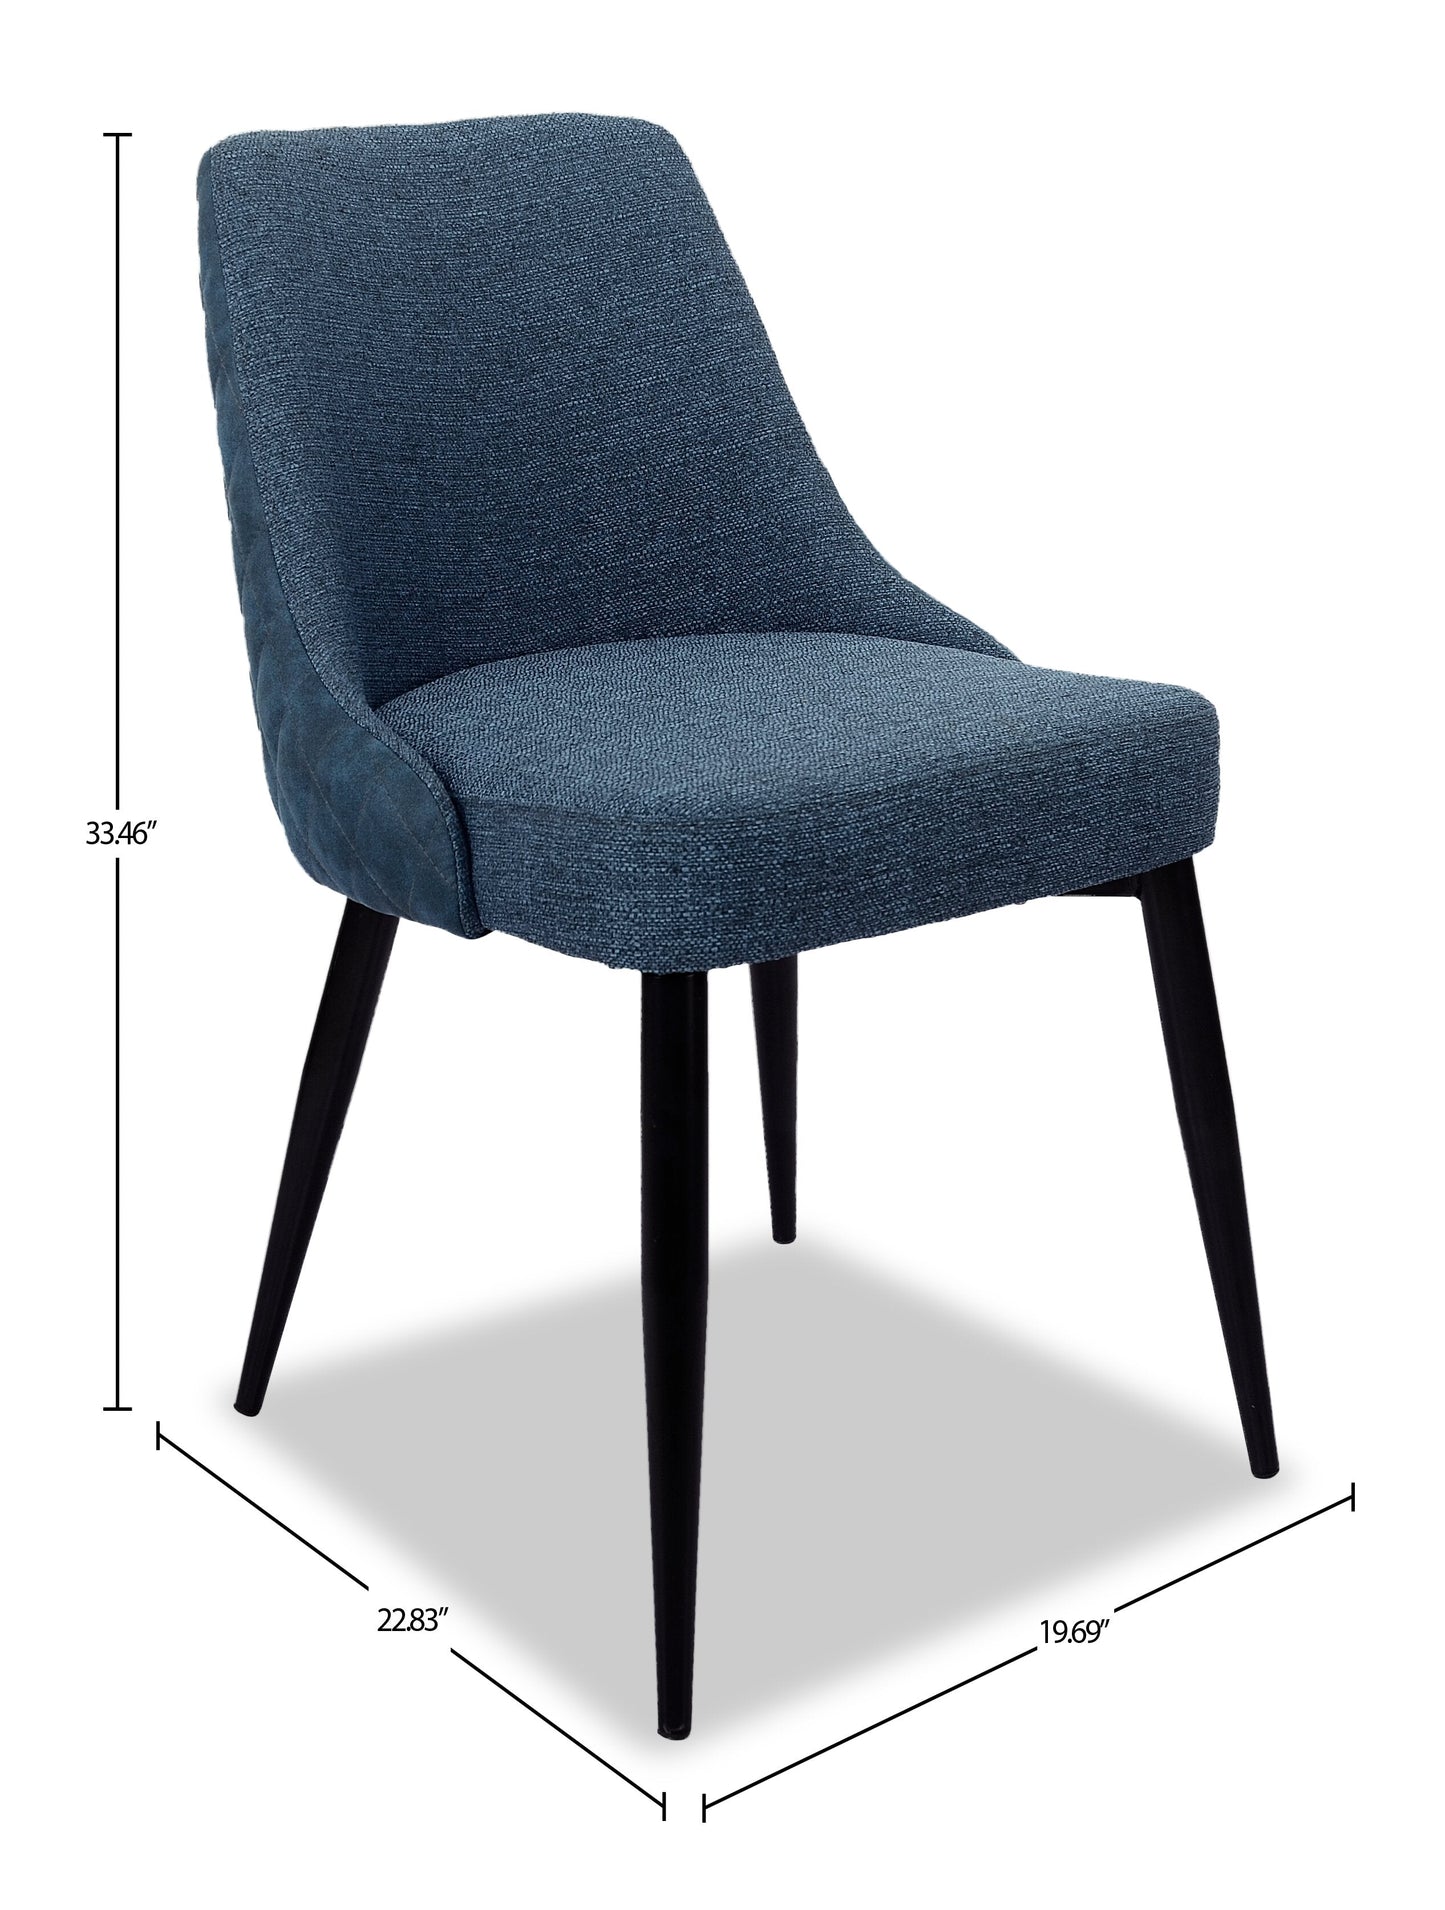 Leicester Dining Chair - Blue